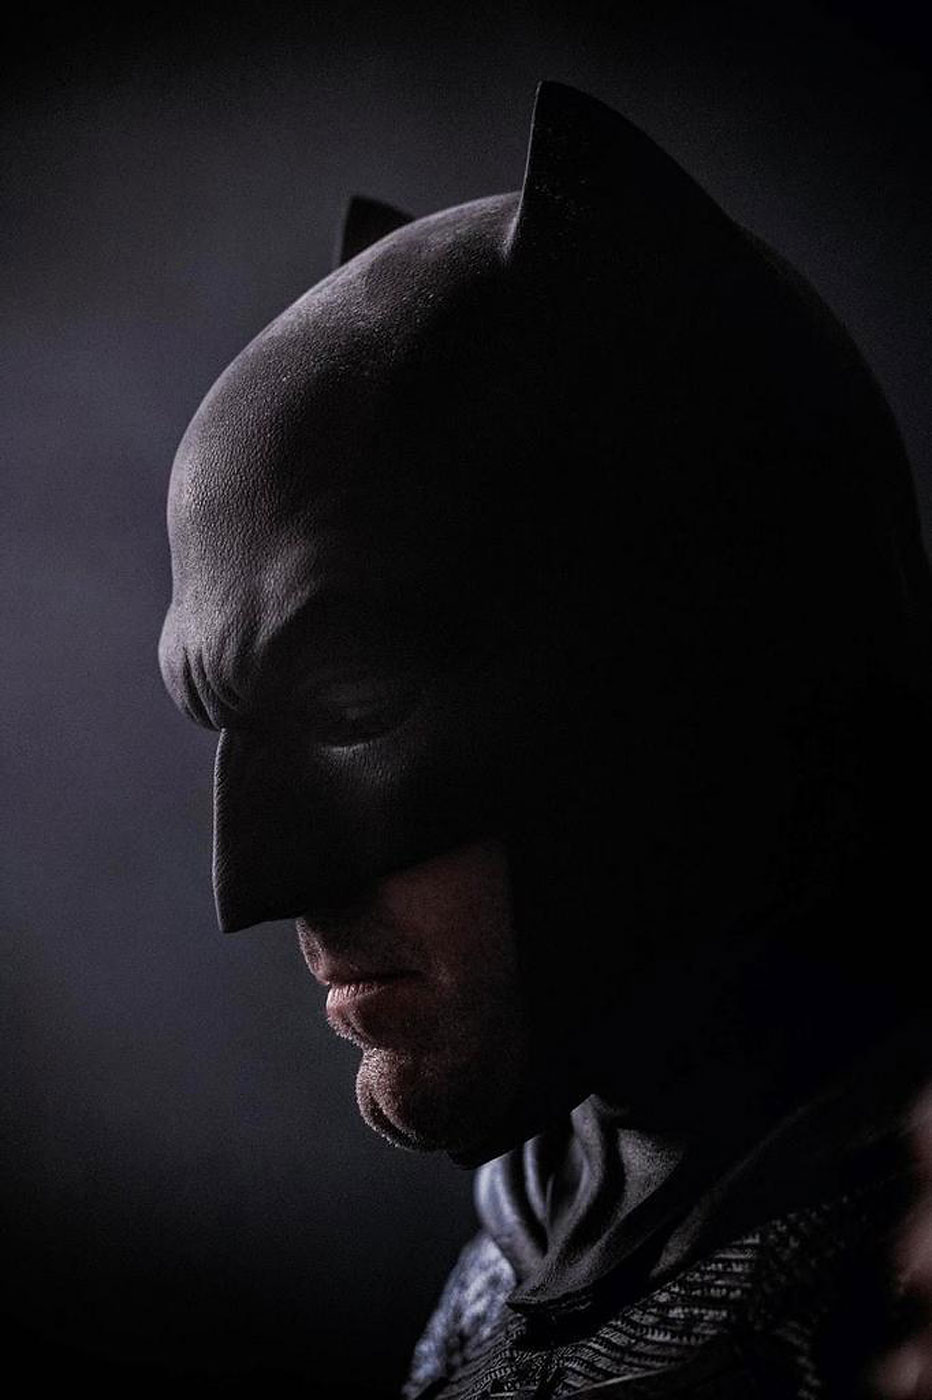 Ben Affleck is the latest to join the ranks of actors who have portrayed the caped crusader, in the upcoming Batman v Superman: Dawn of Justice movie.